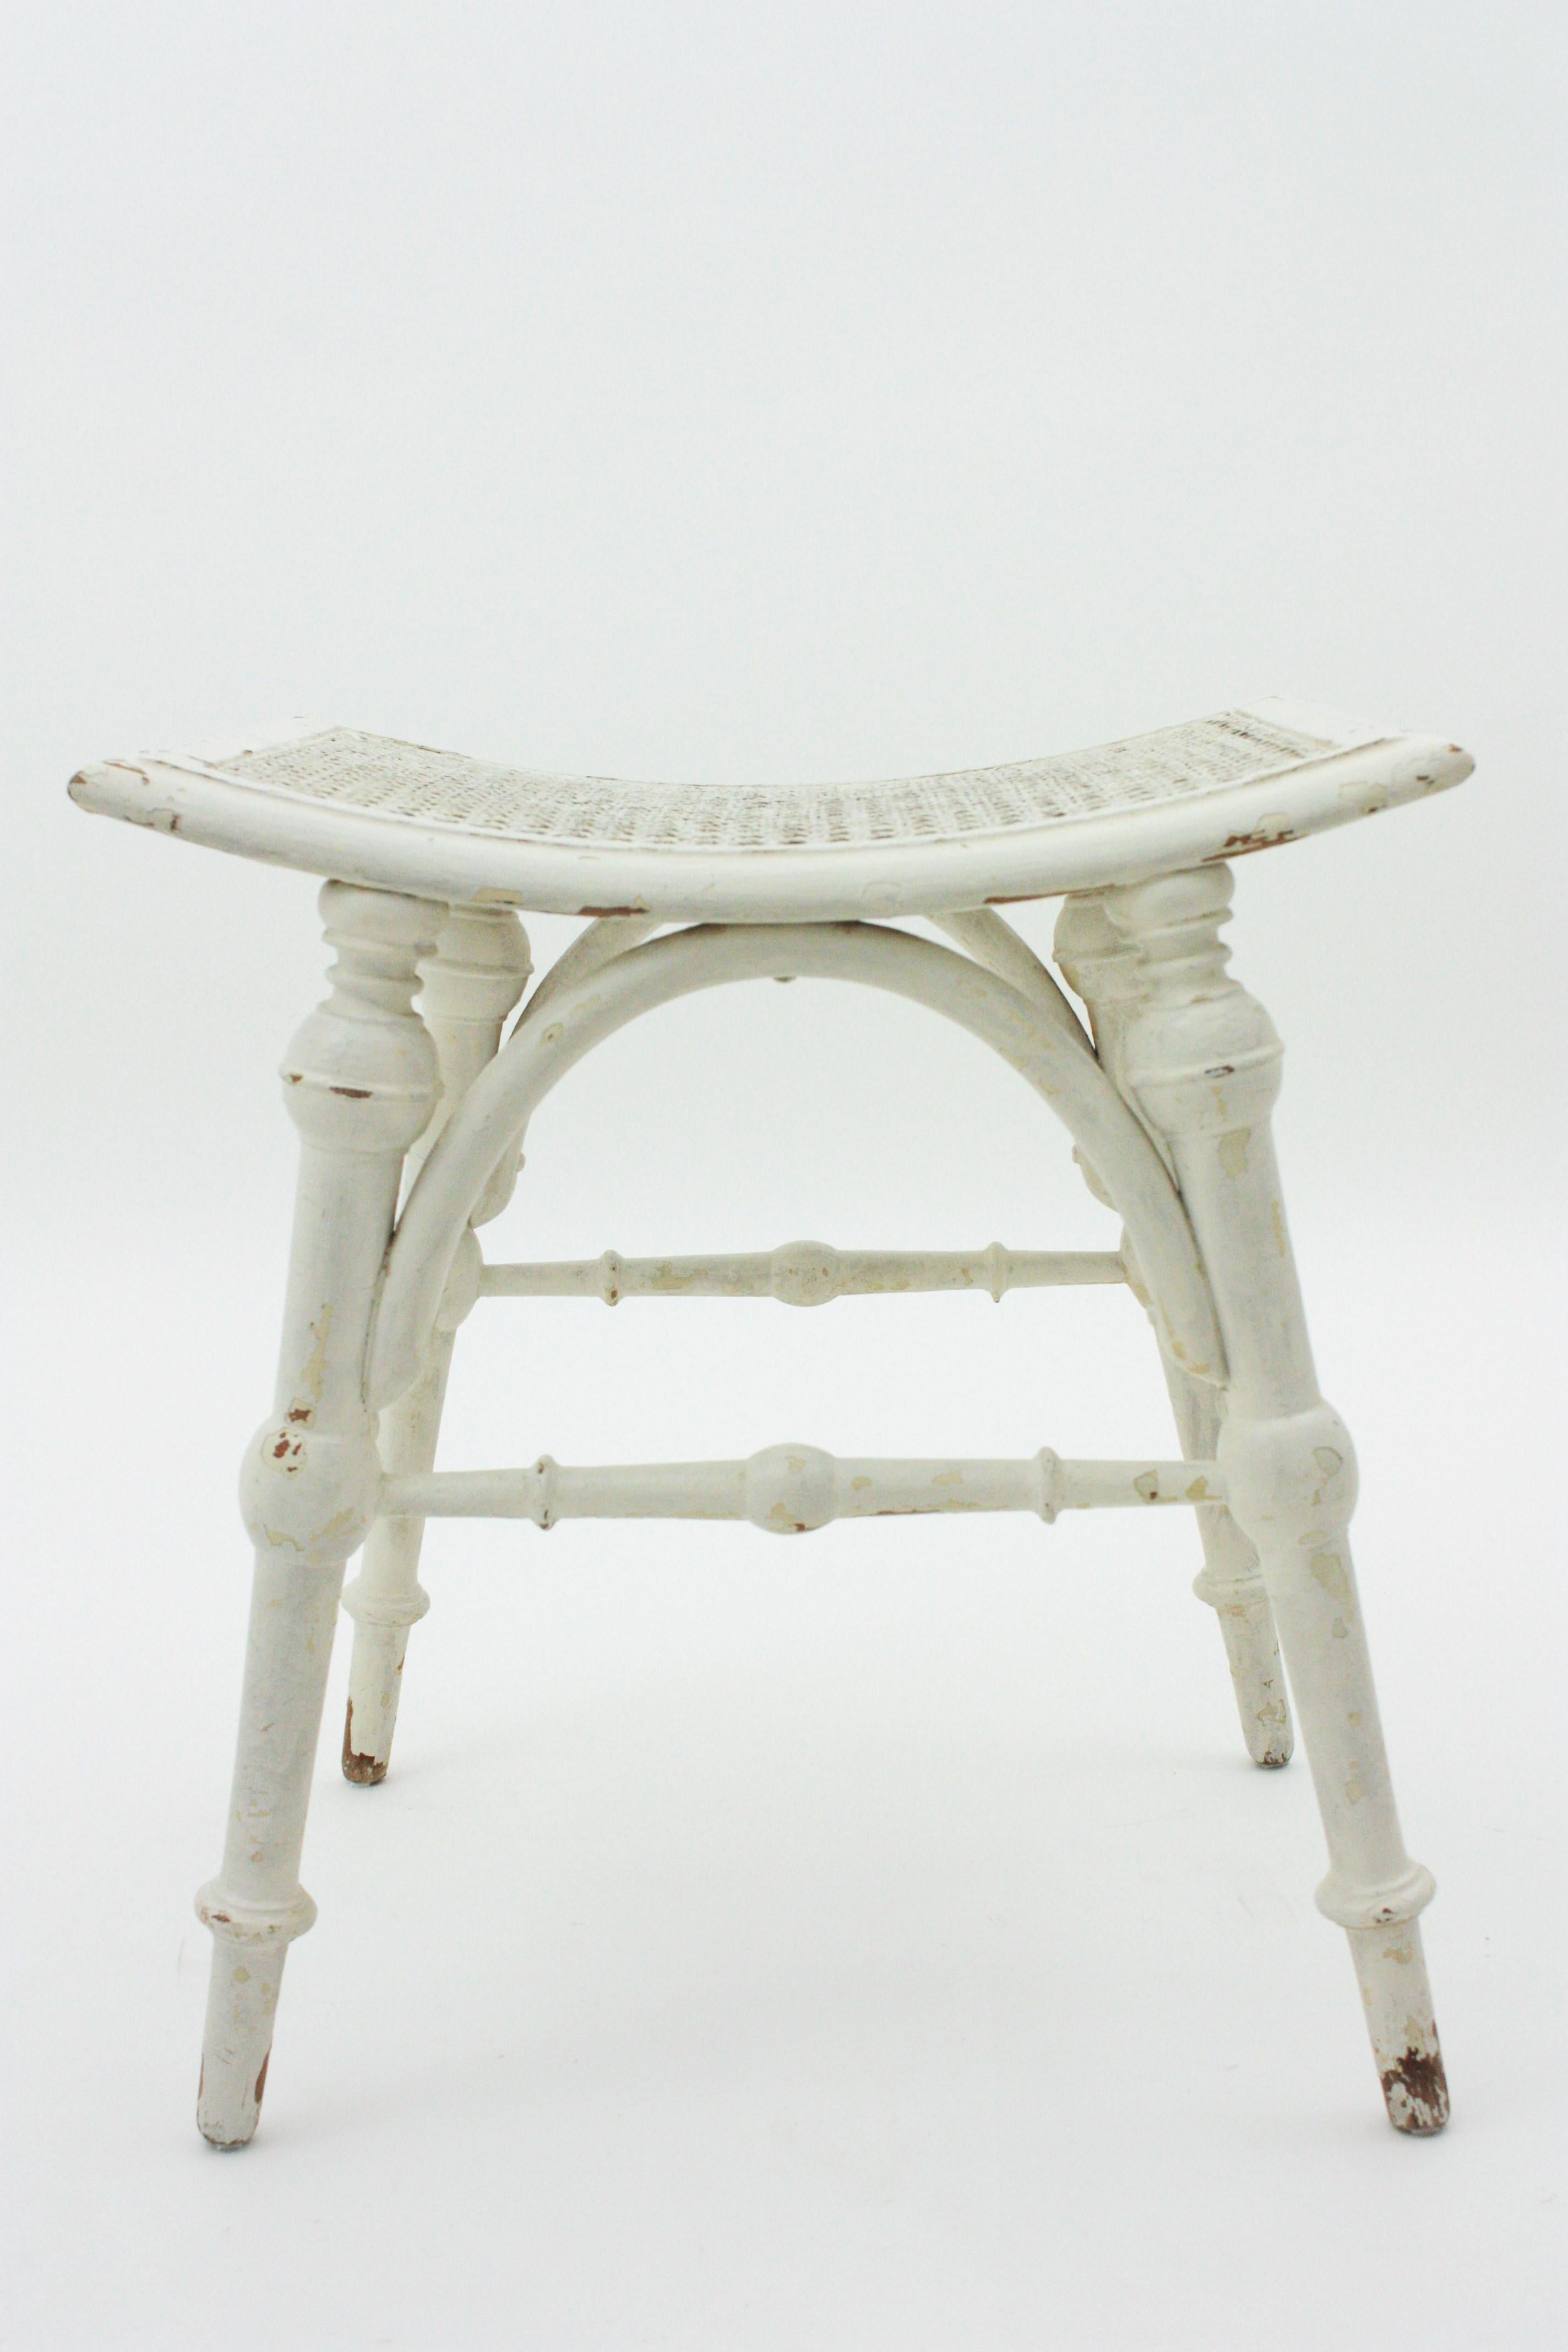 20th Century White Patinated Wood Stool with Cane Seat, Chippendale Style For Sale